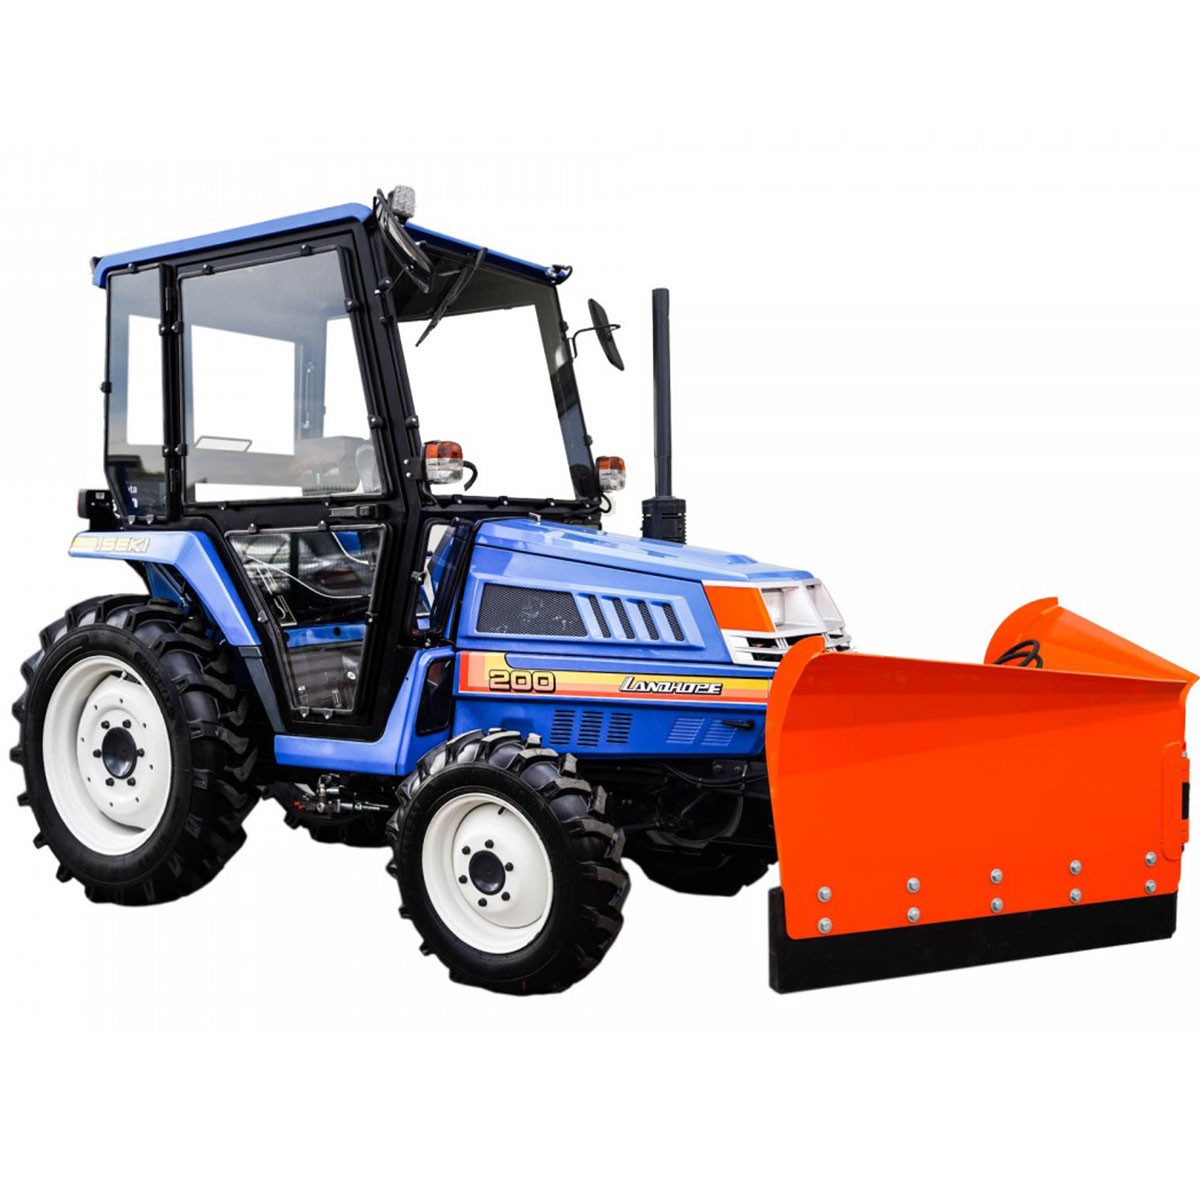 Iseki TU200F 4 x 4 - 20 HP with a cabin and a arrow snow plow